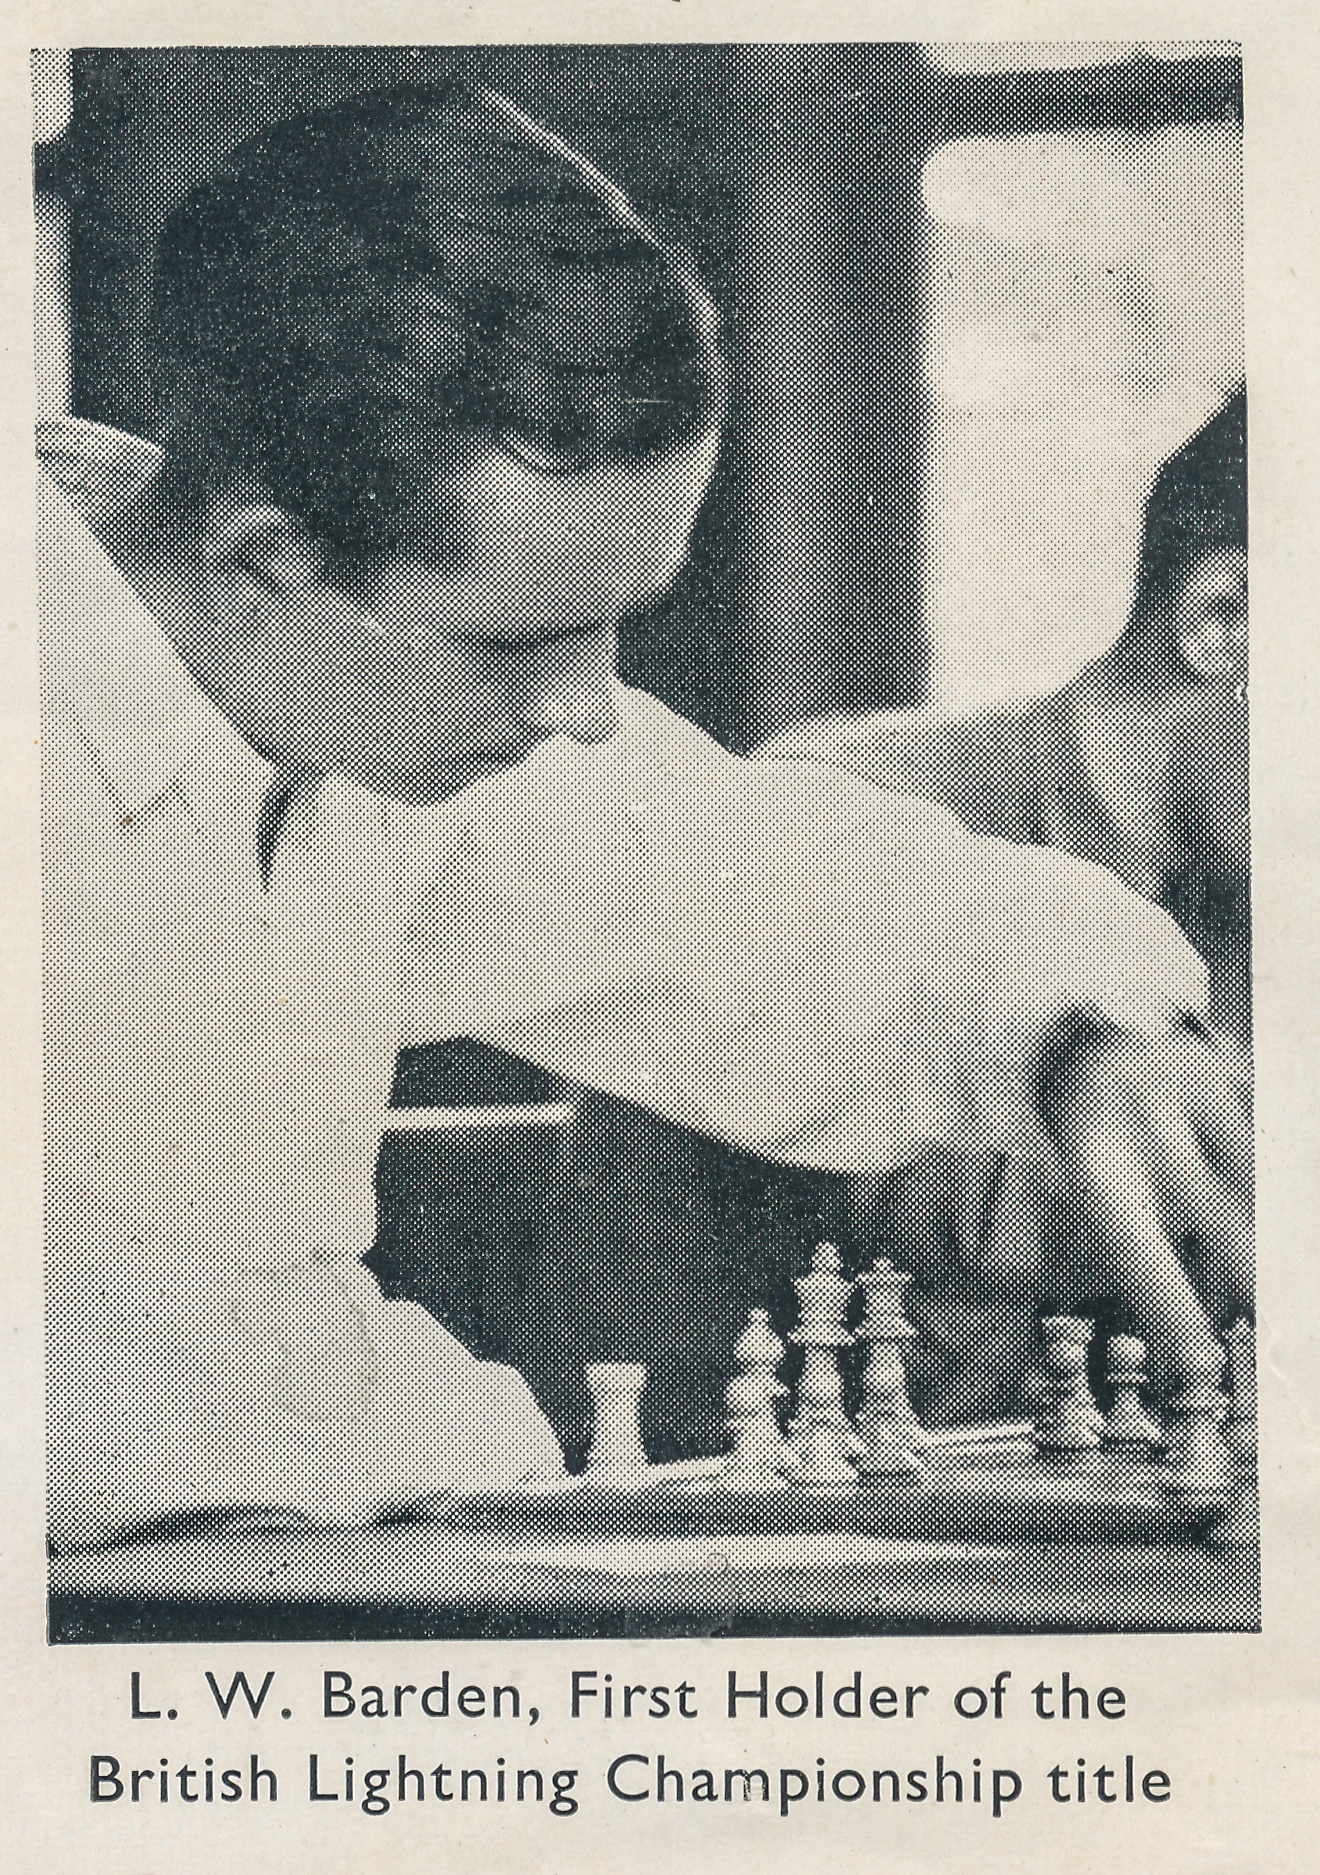 Leonard Barden, First Holder of the British Lightning Championship title played at the Ilford Congress between May 22nd and May 25th, 1953